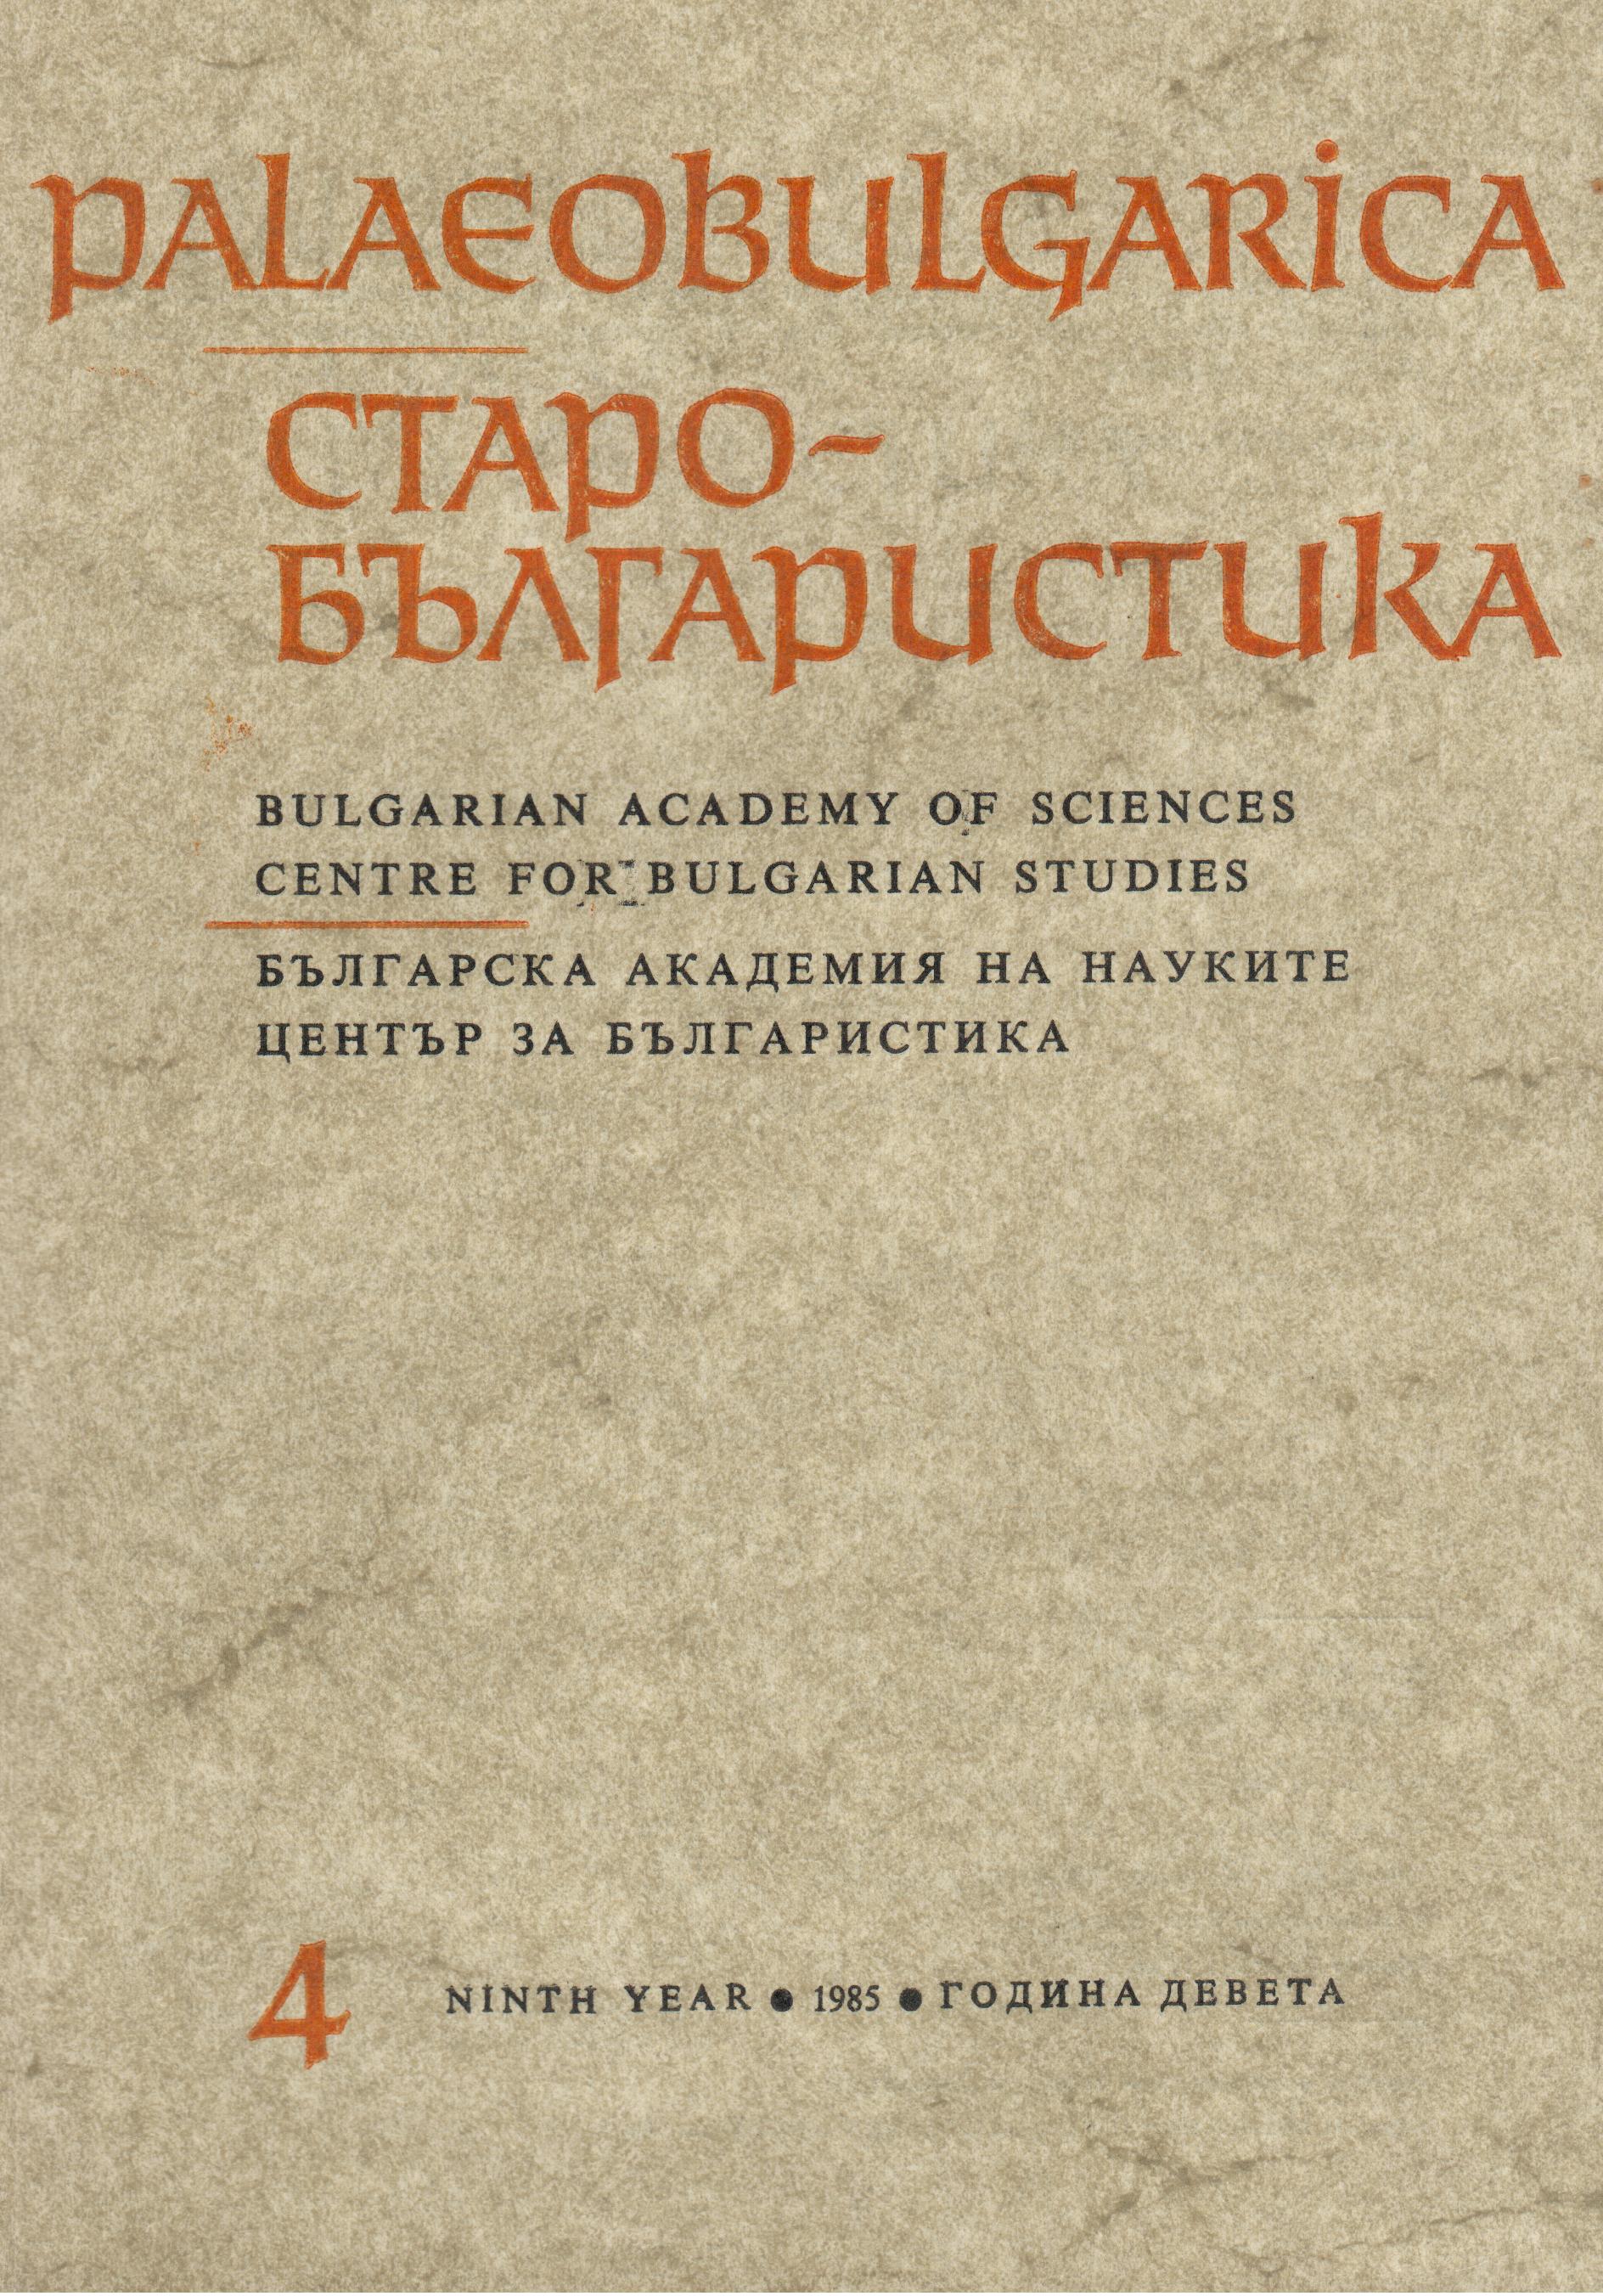 Annual Contents of the Review Palaeobulgarica, 1985 Cover Image